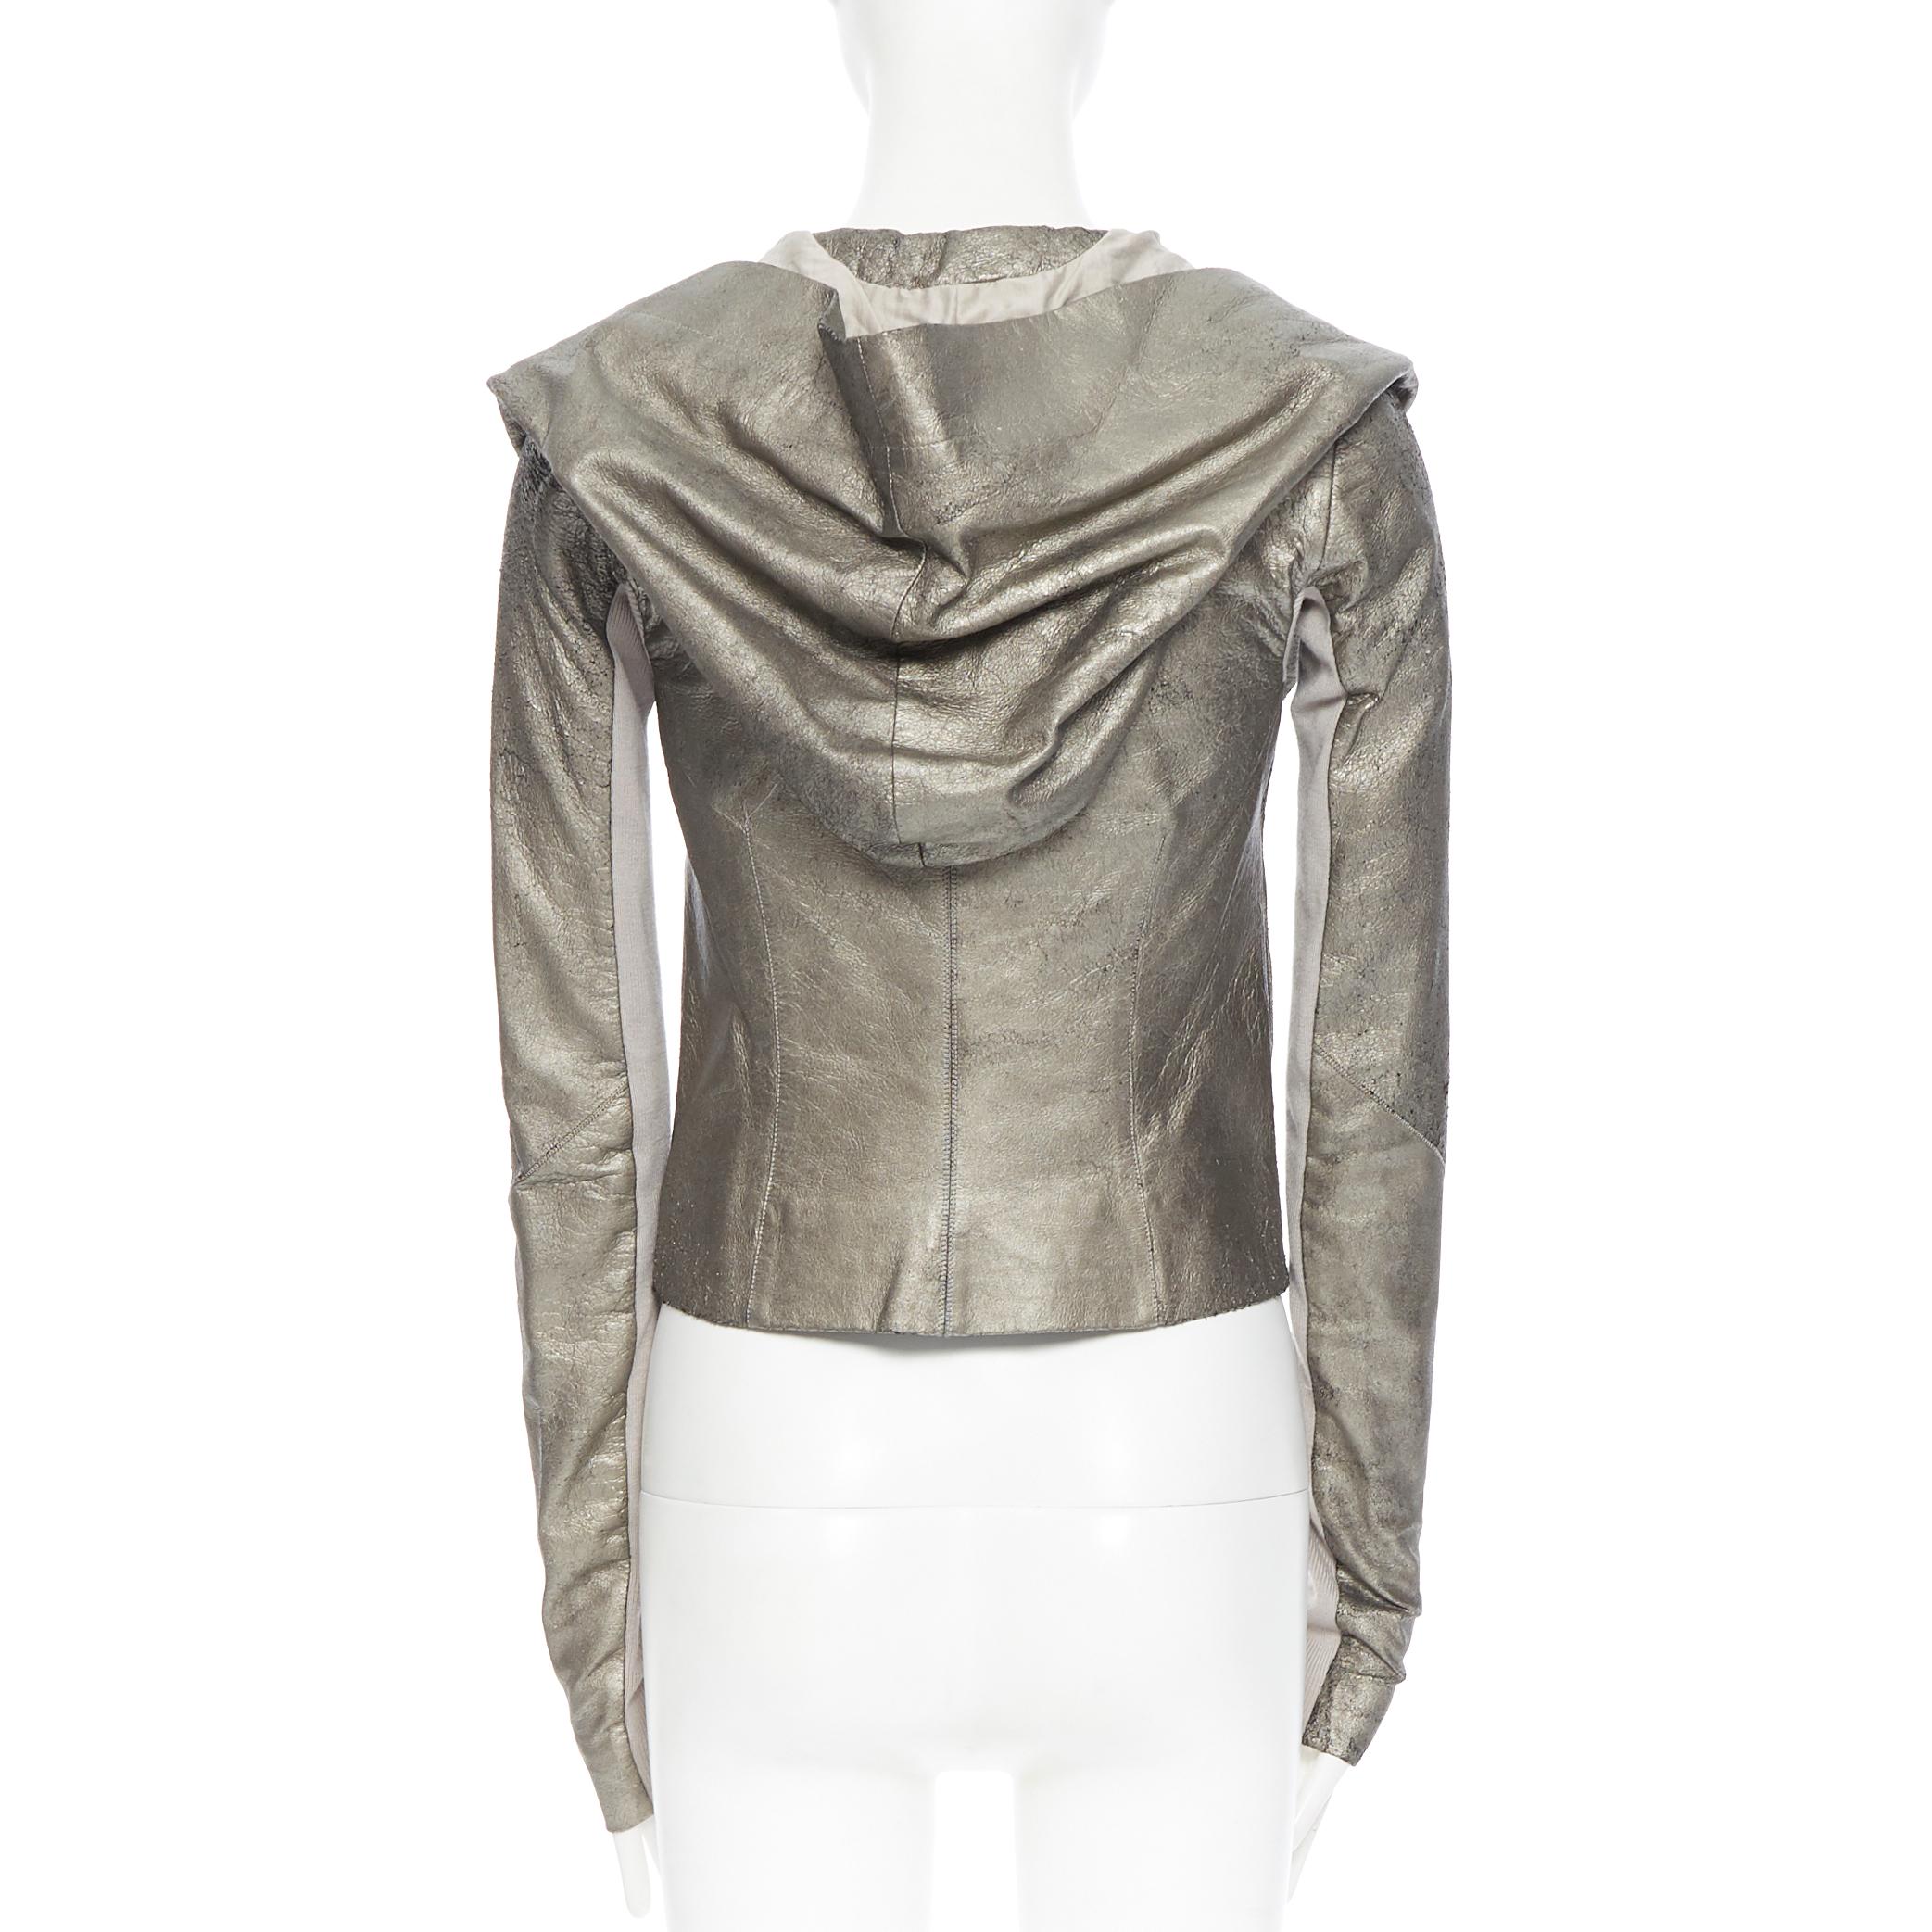 RICK OWENS metallic gold distressed supple leather cropped biker jacket US4 
Reference: LNKO/A01207 
Brand: Rick Owens 
Designer: Rick Owens 
Material: Leather 
Color: Gold 
Pattern: Solid 
Closure: Zip 
Extra Detail: Distressed supple leather upper